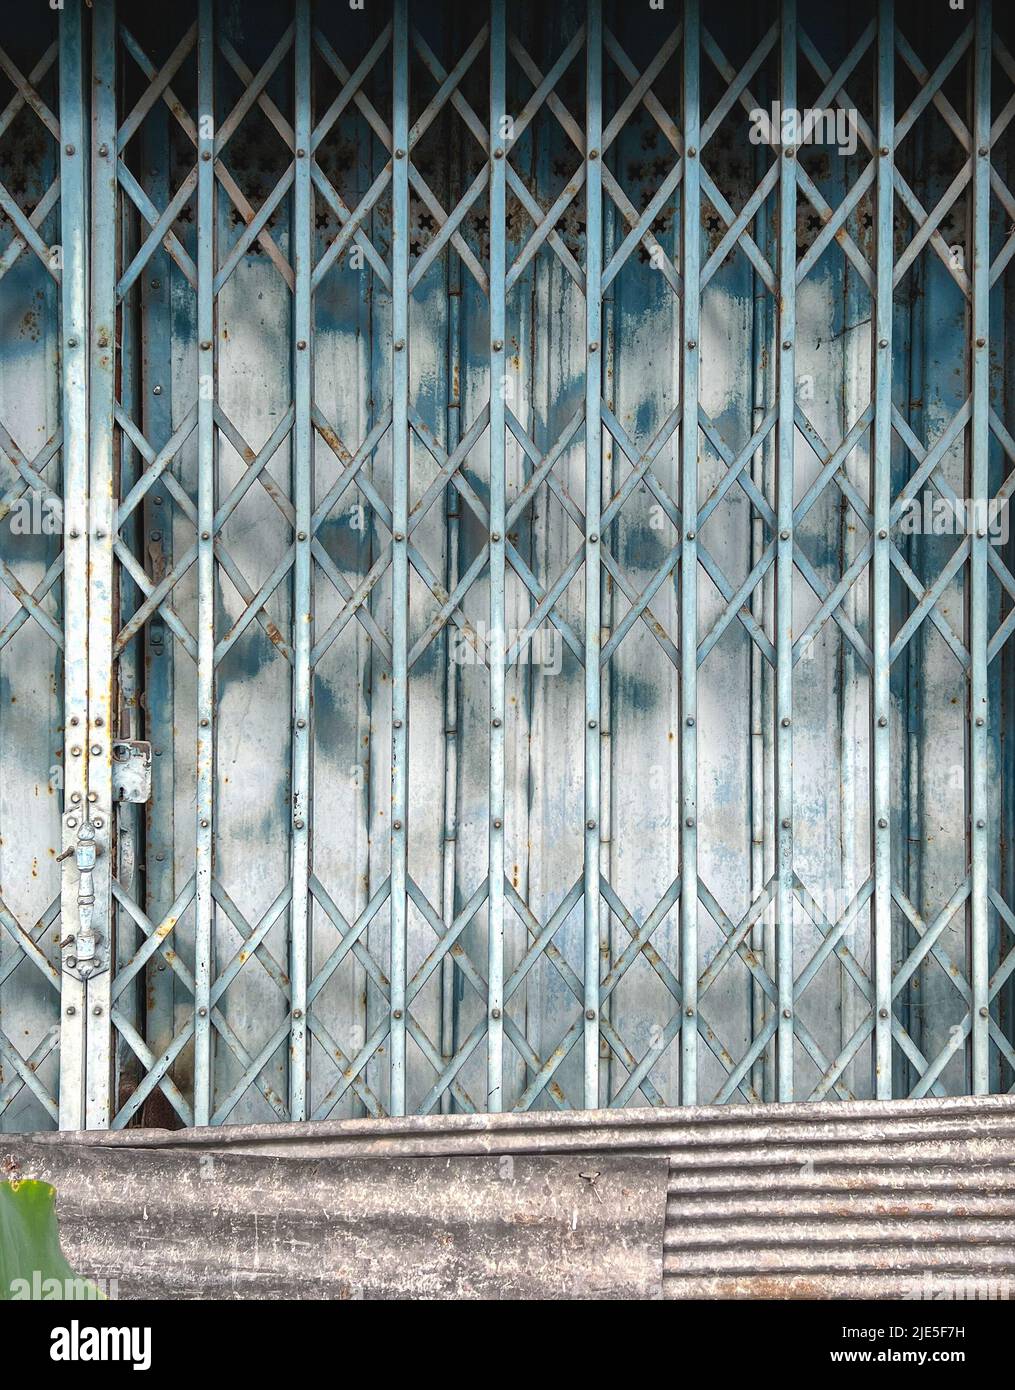 Gate folding. folding metal gate with lock and zinc, galvanized reparing panels of the building, vintage style building folding gate. Stock Photo